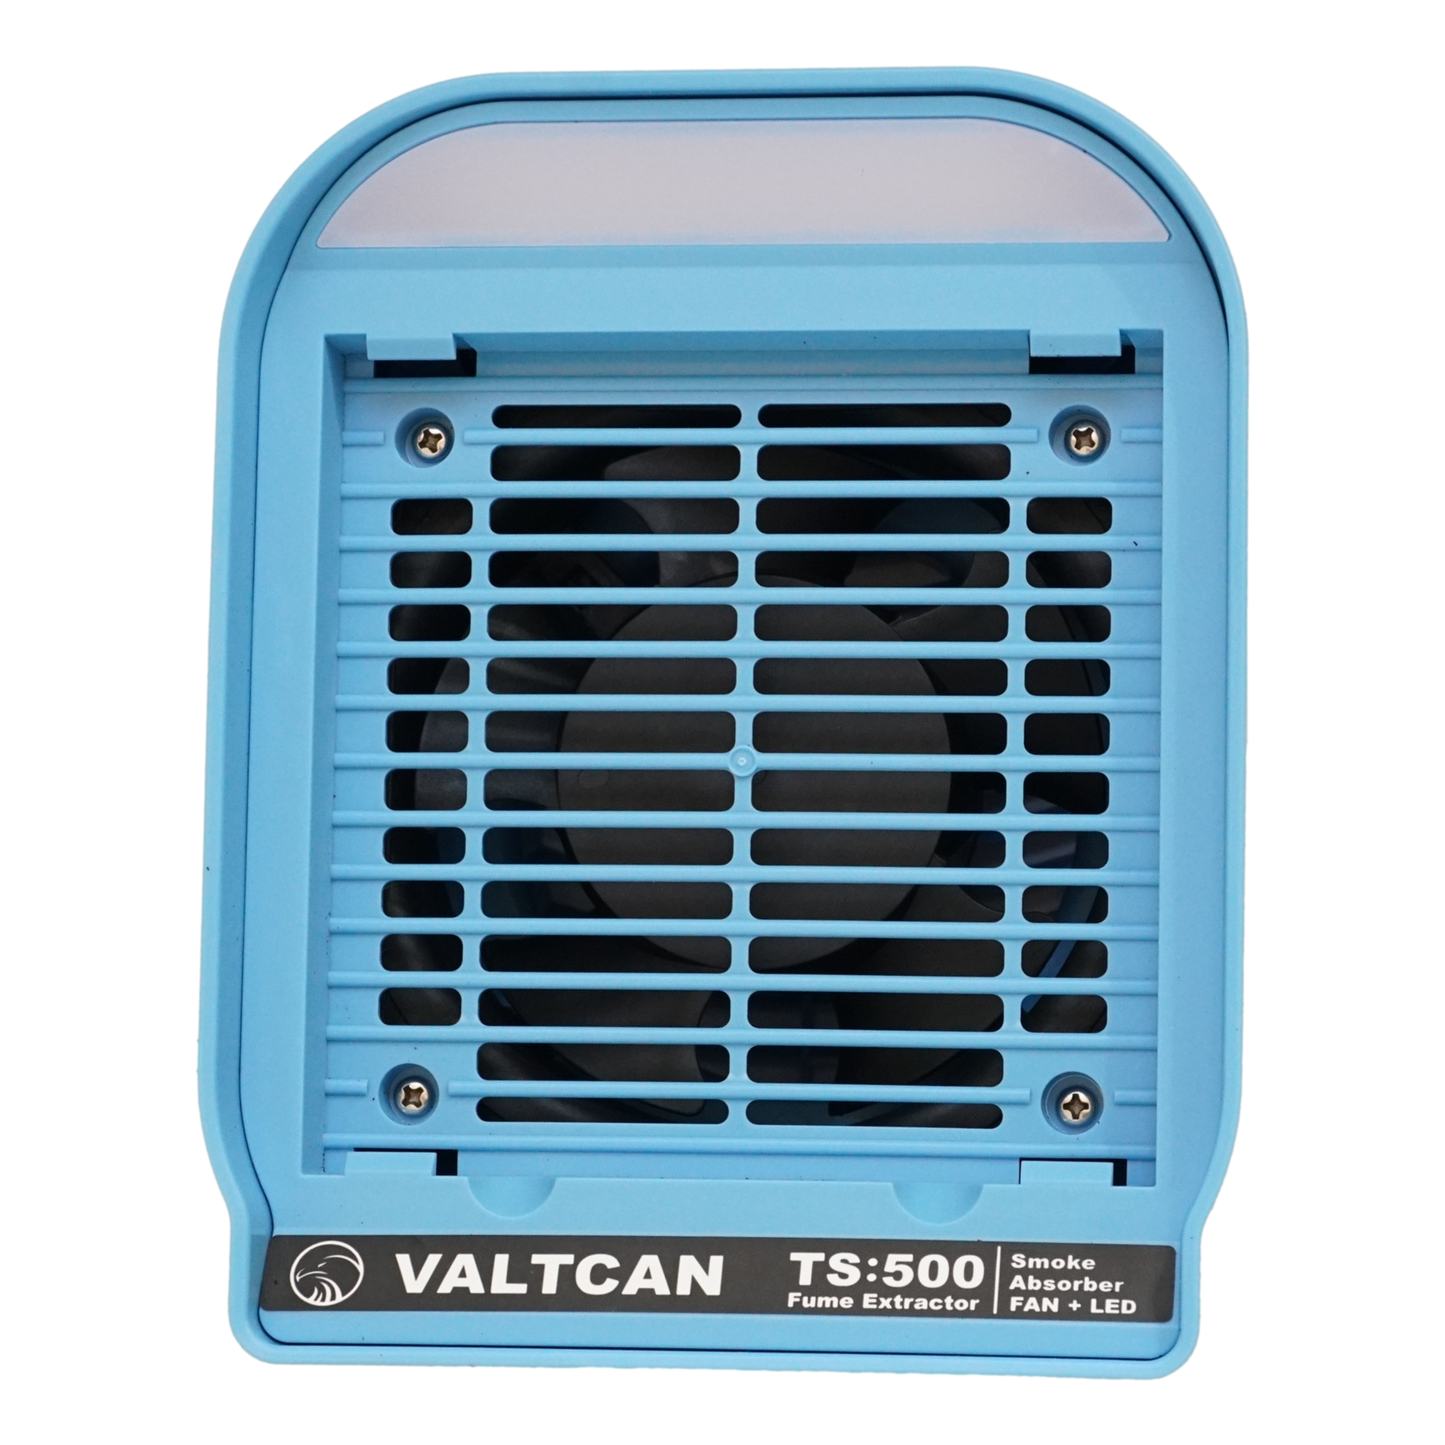 Valtcan TS:500 Fume Extractor Soldering Fan Smoke Absorber with Overhead LED Light Lamp